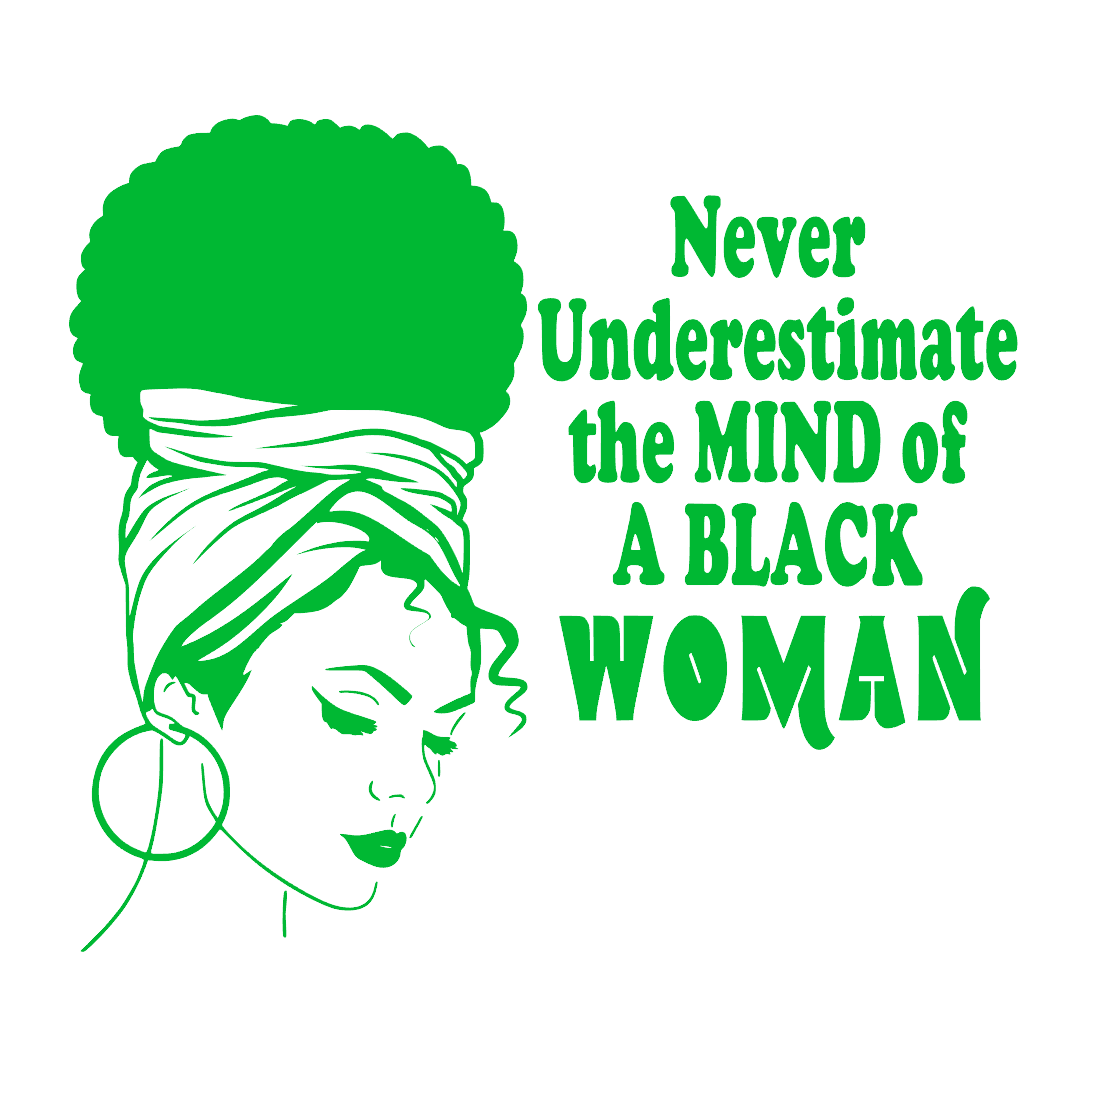 Never Underestimate the MIND of A BLACK Woman